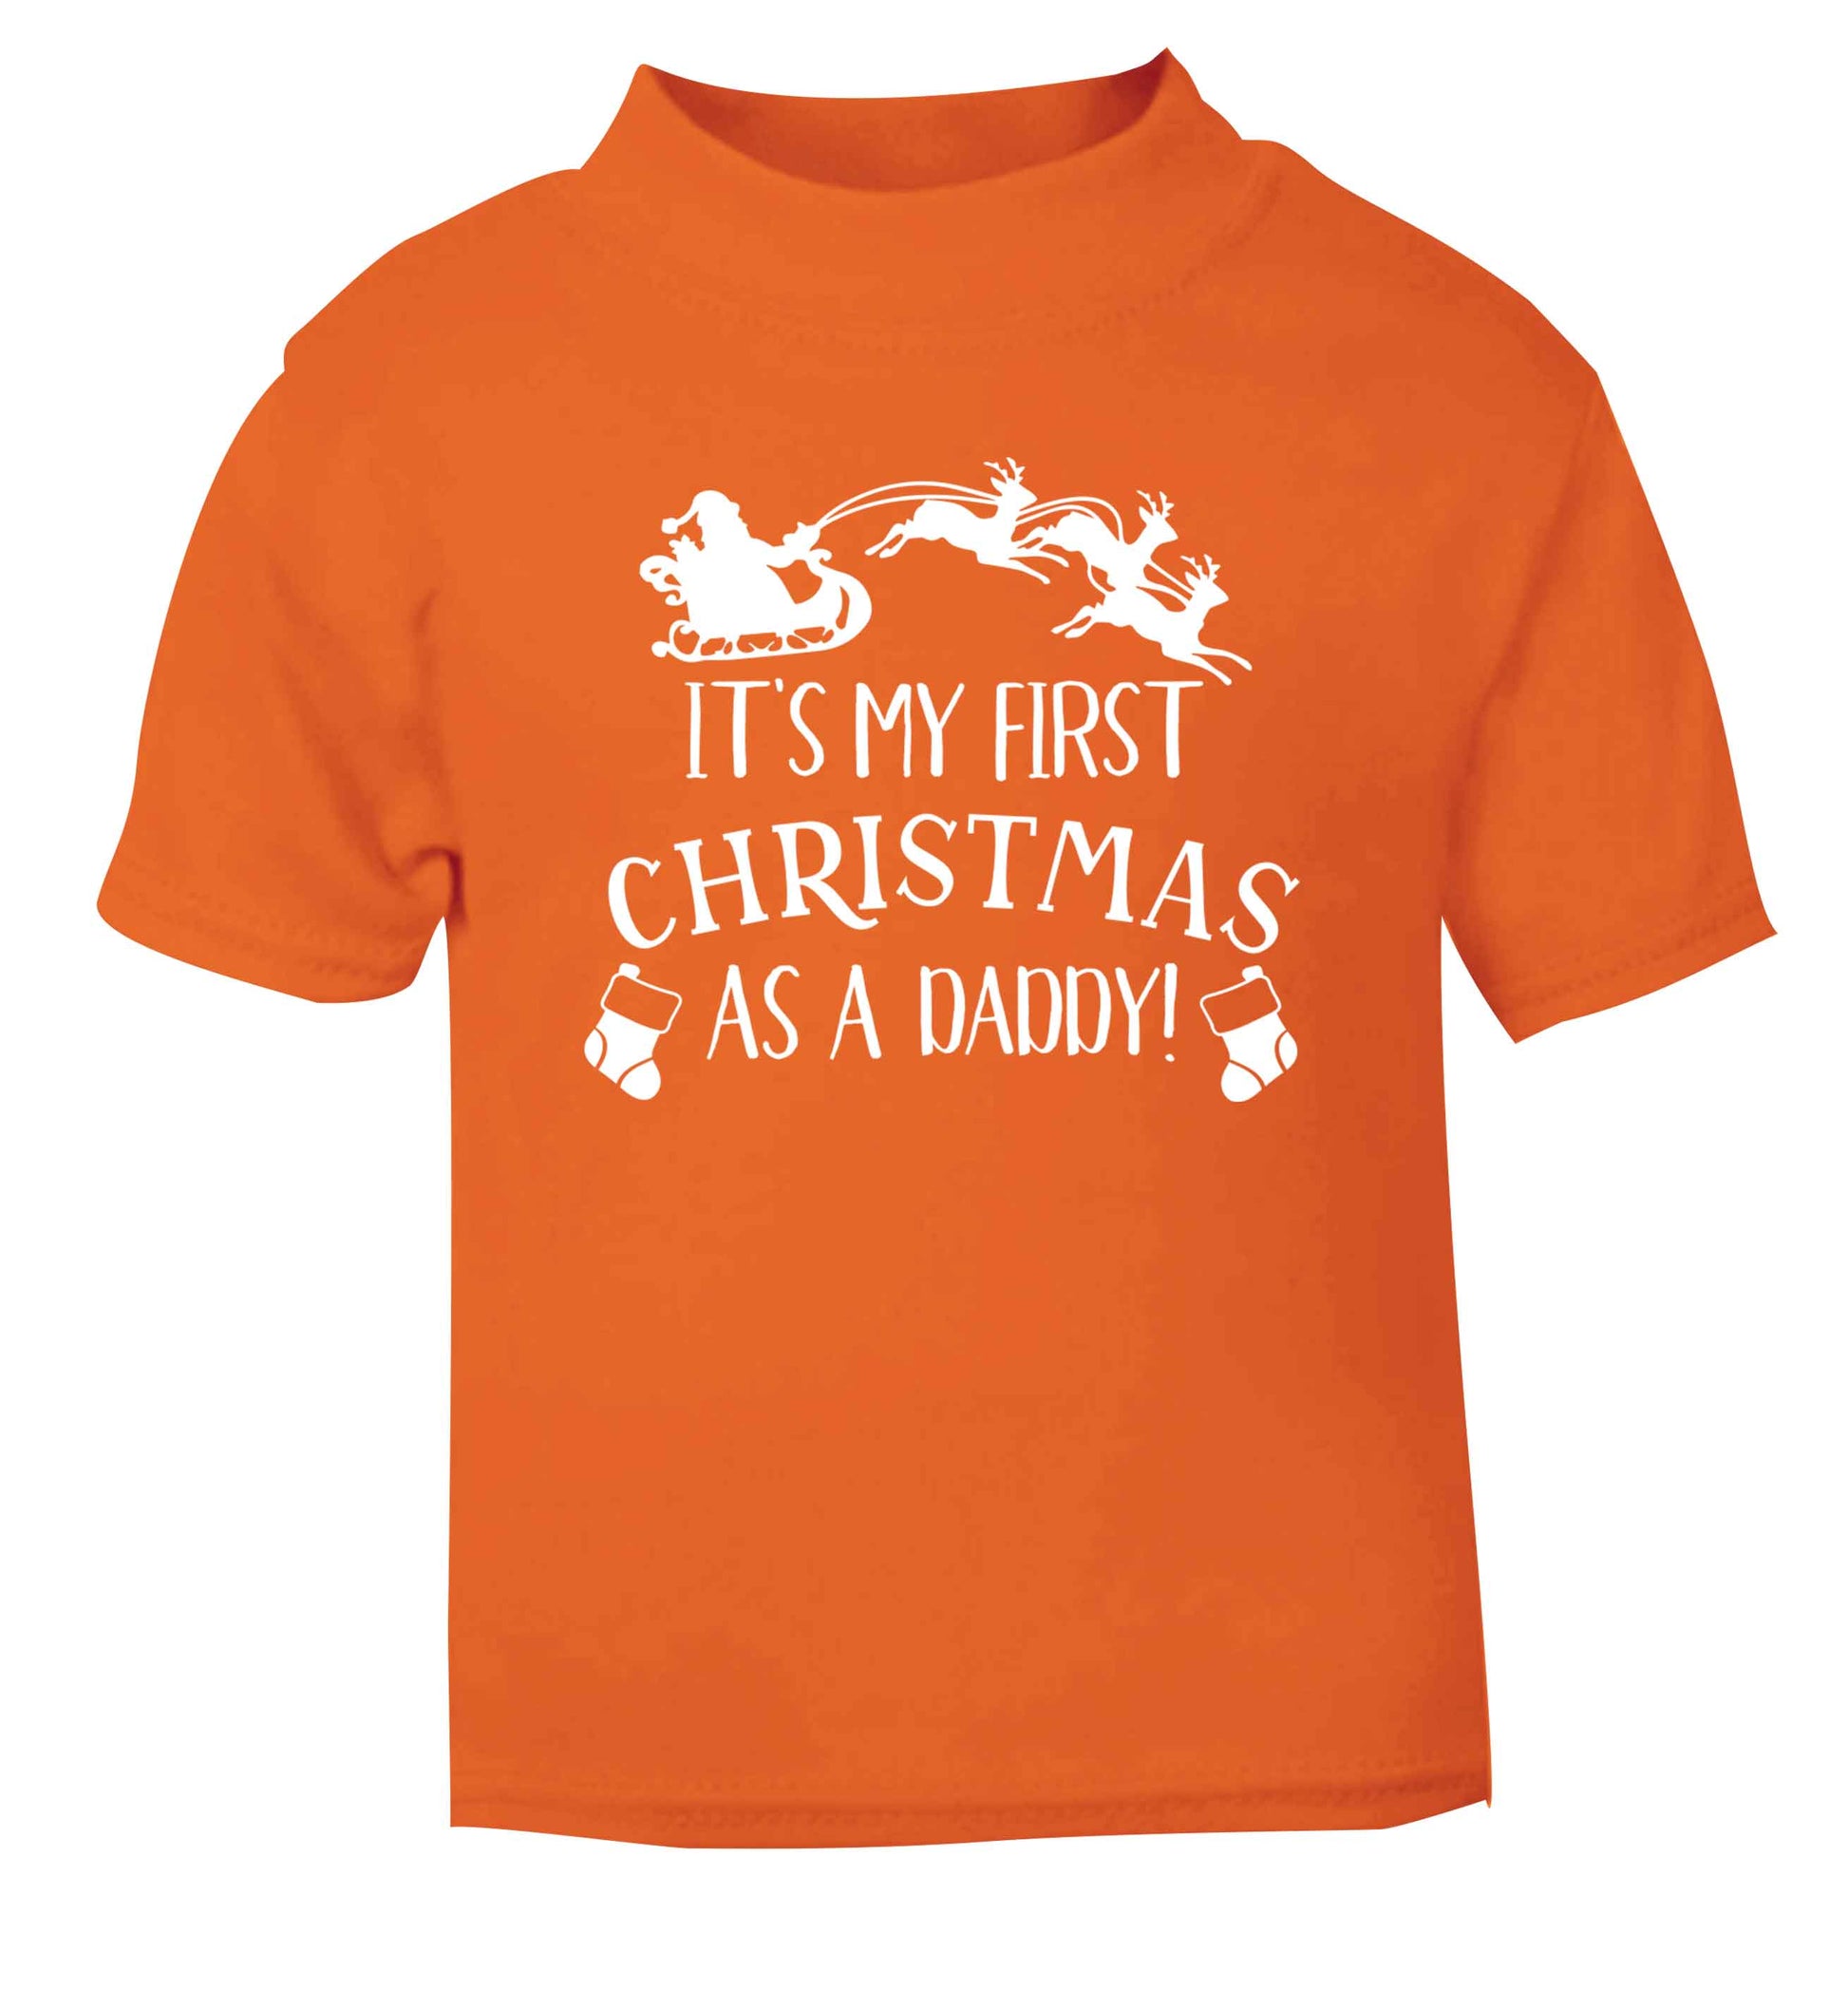 It's my first Christmas as a daddy orange Baby Toddler Tshirt 2 Years